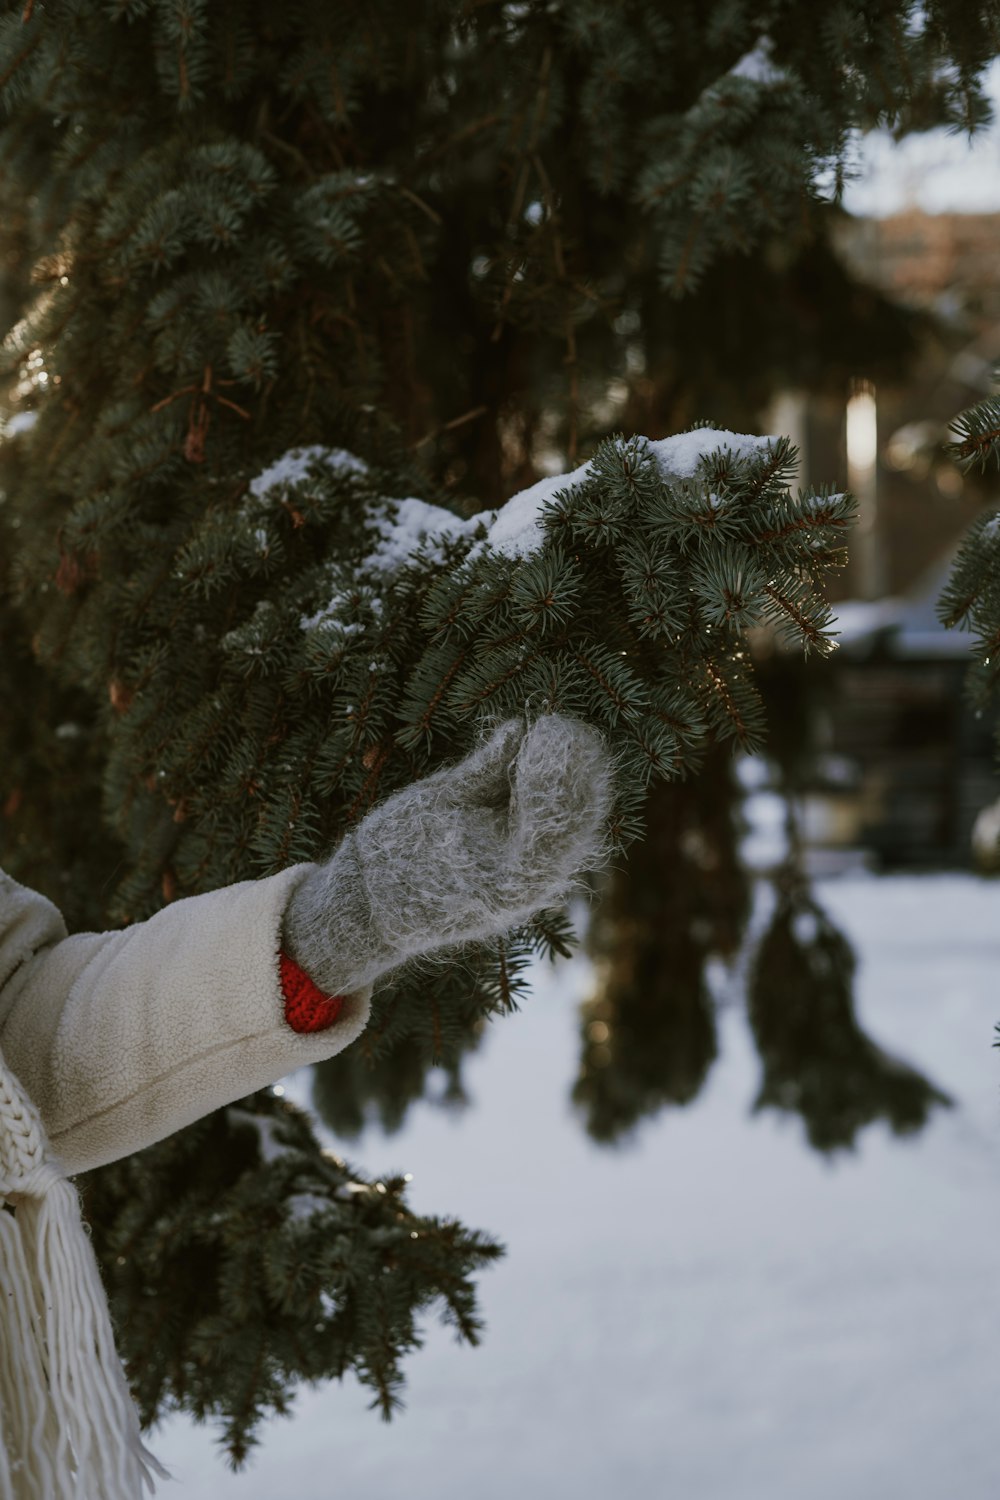 a person wearing a scarf and mittens holding a pine tree